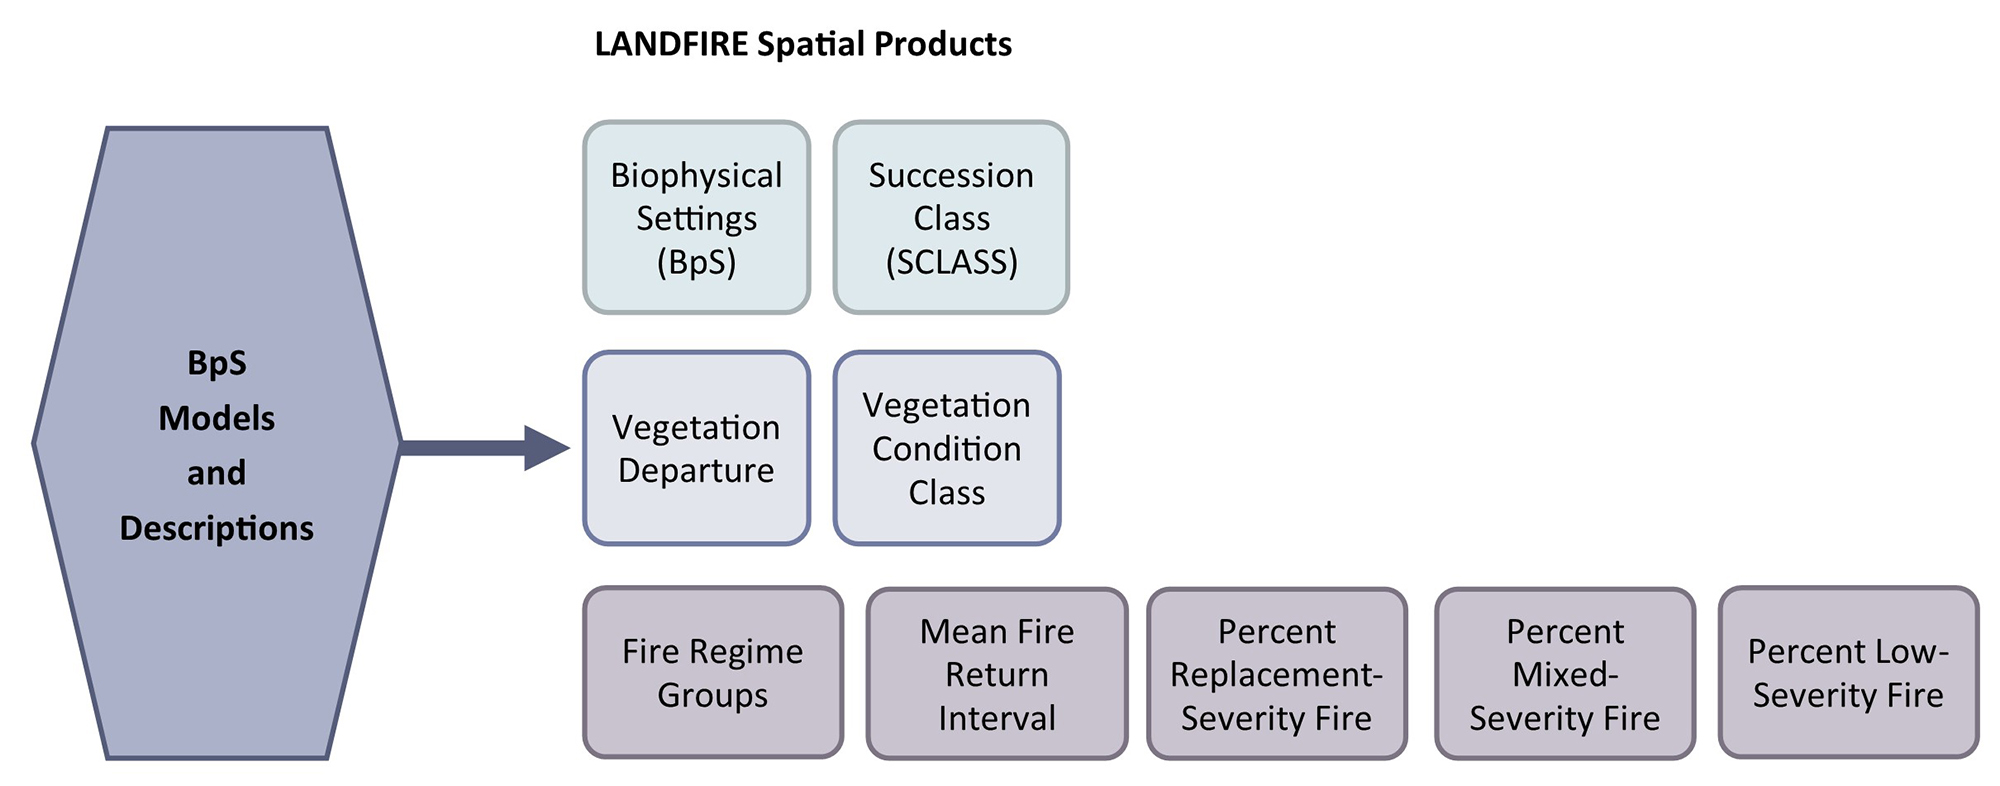 BpS models and descriptions contribute to BpS, succession class, vegetation departure, vegetation condition class, and fire regime products